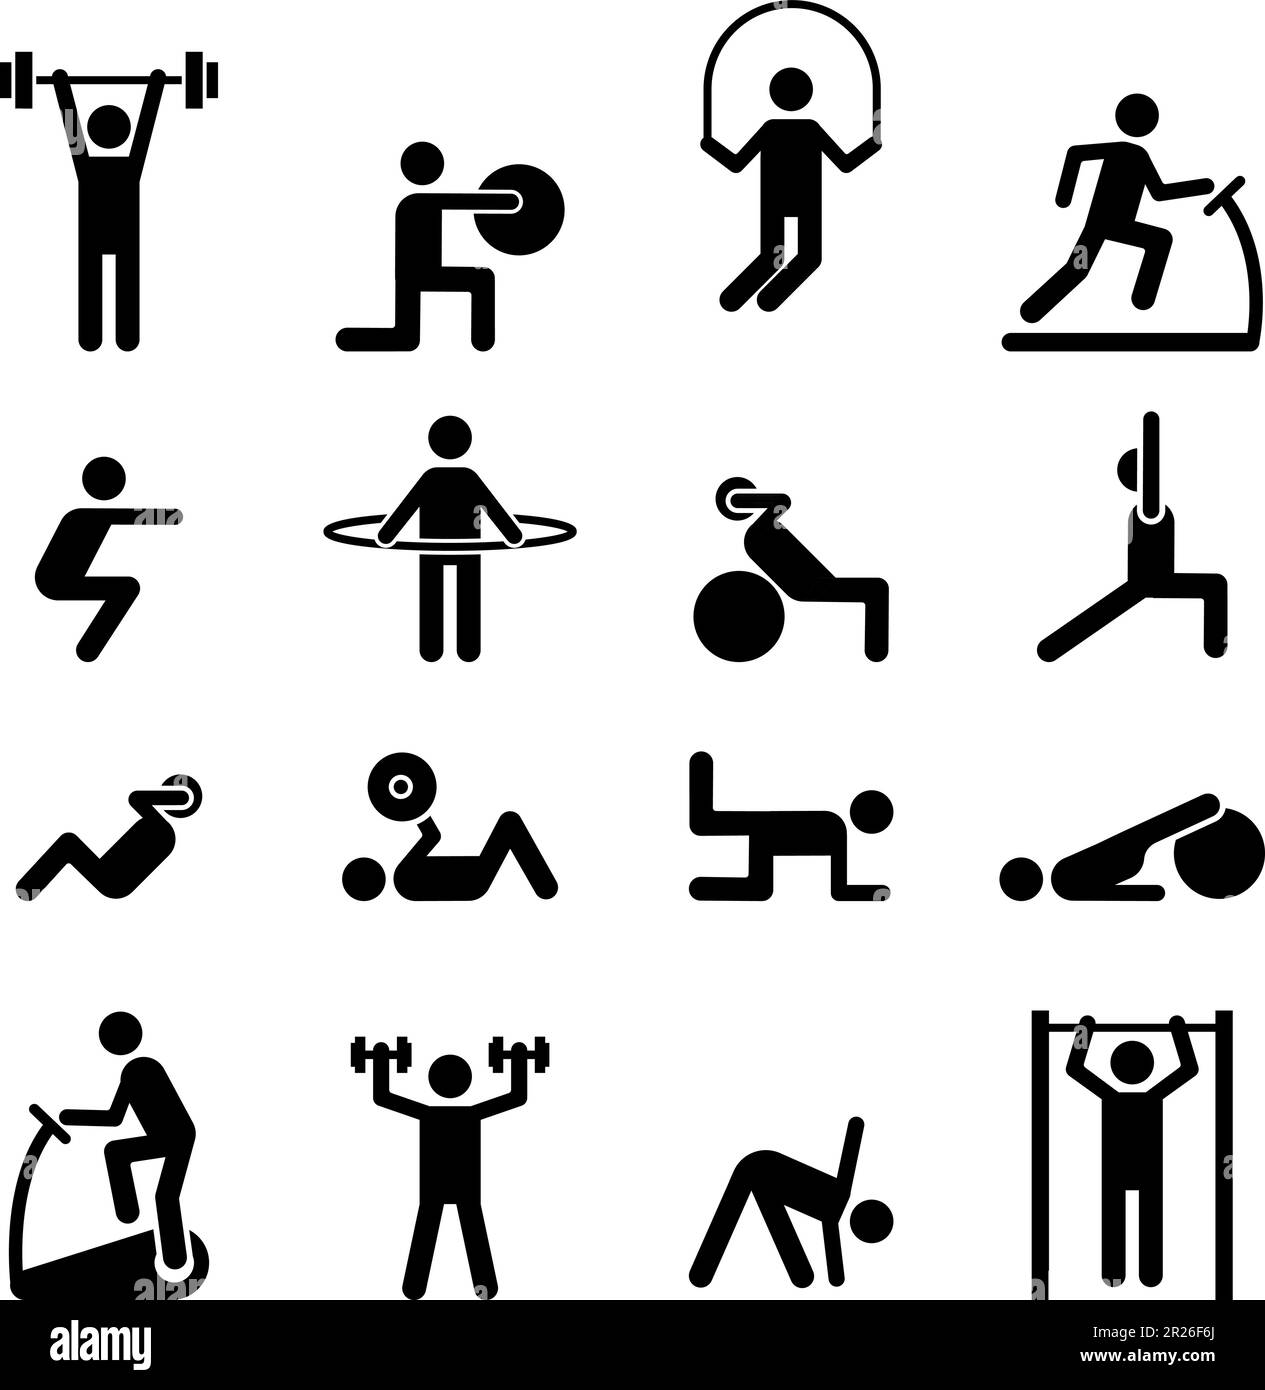 Sport people icons. Gym lifting warm-up stretch symbols, fitness poses pictograms, sports exercises athlete vector silhouettes Stock Vector